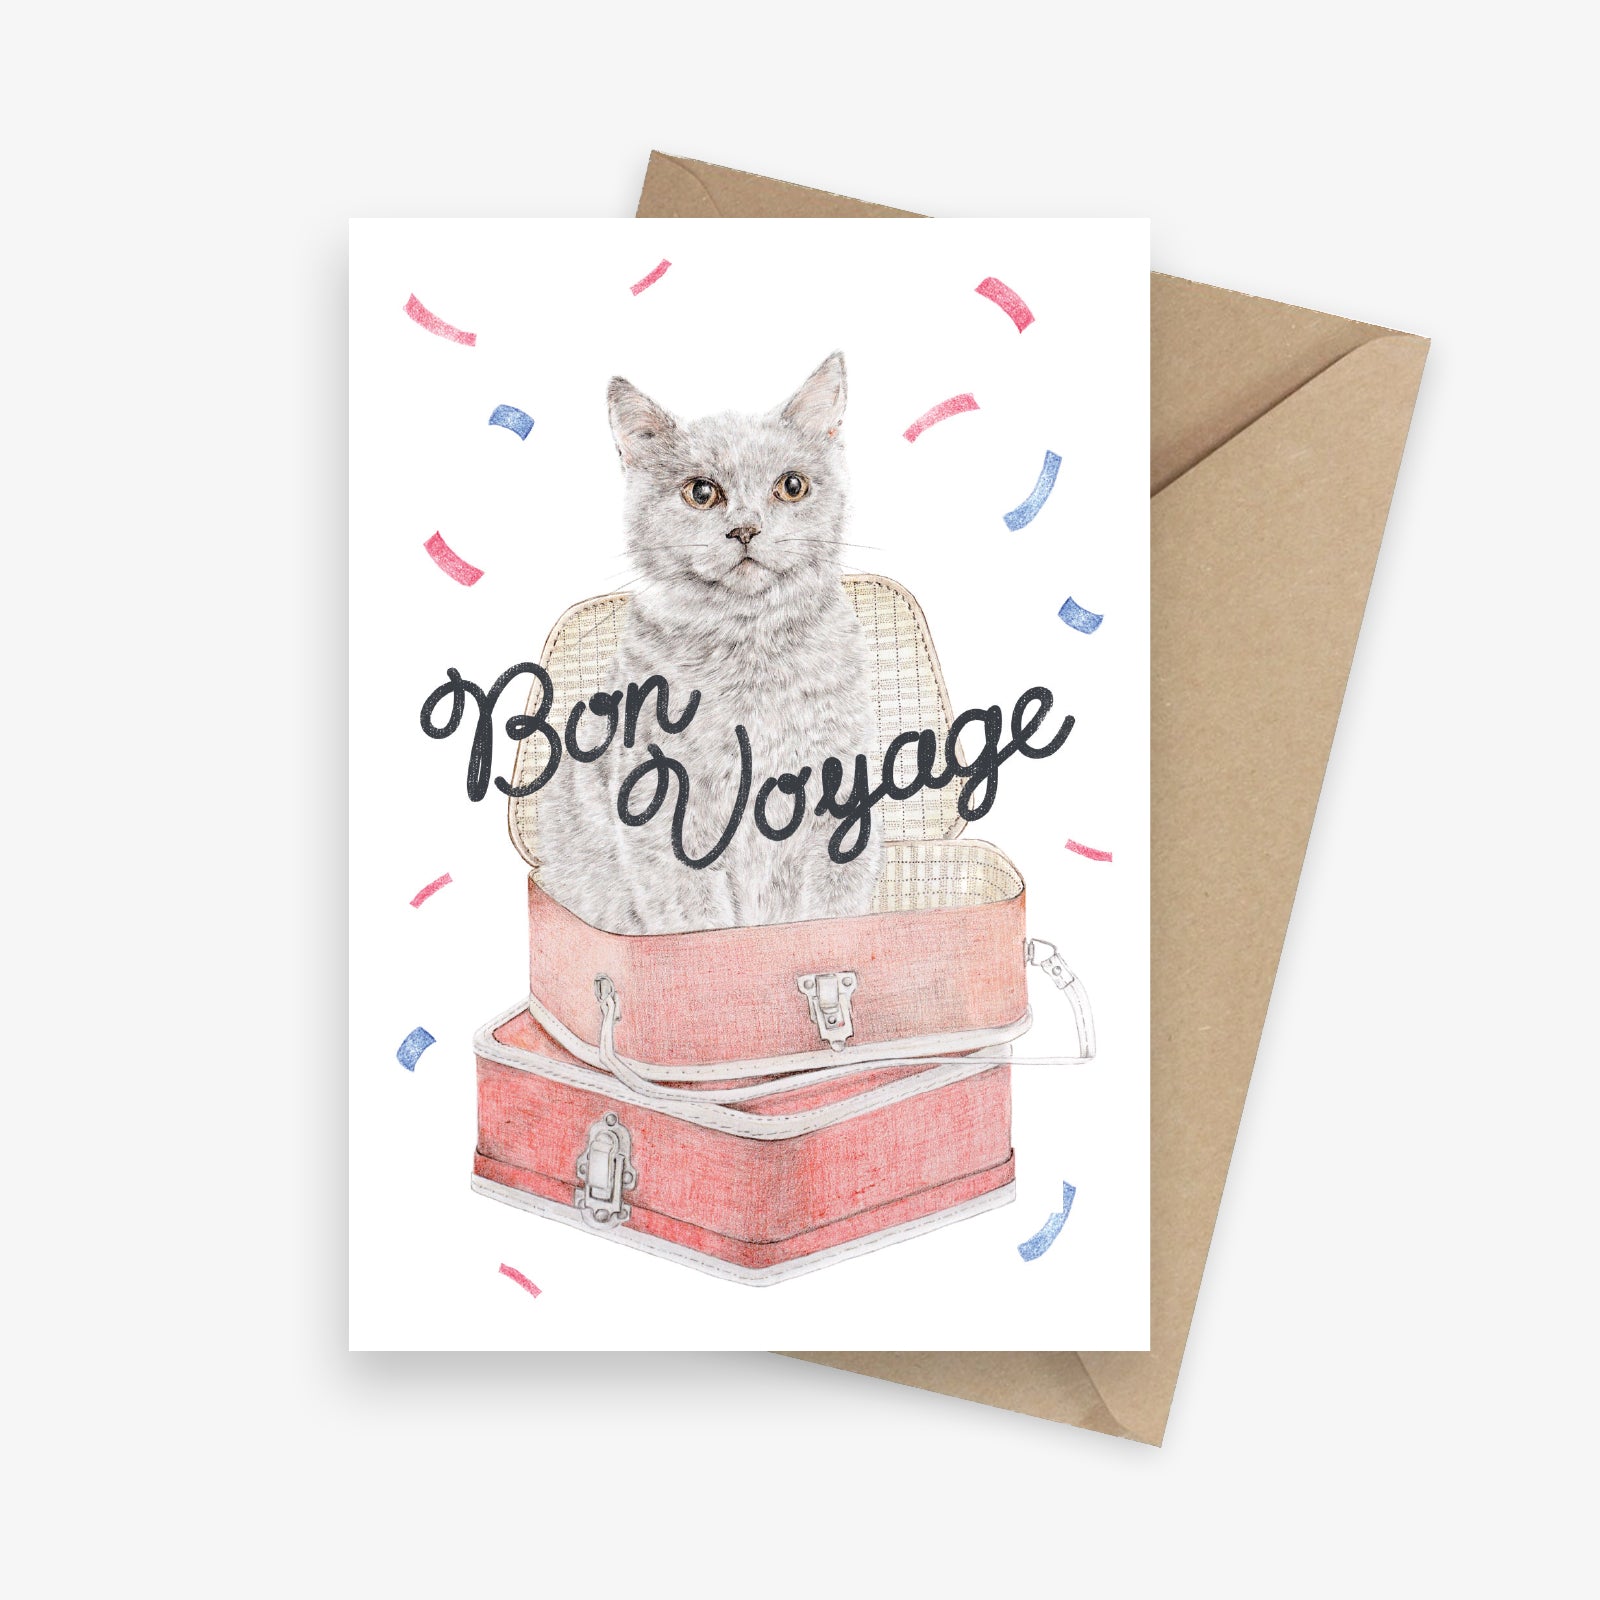 Bon voyage greeting card featuring a cat in a suitcase with confetti.